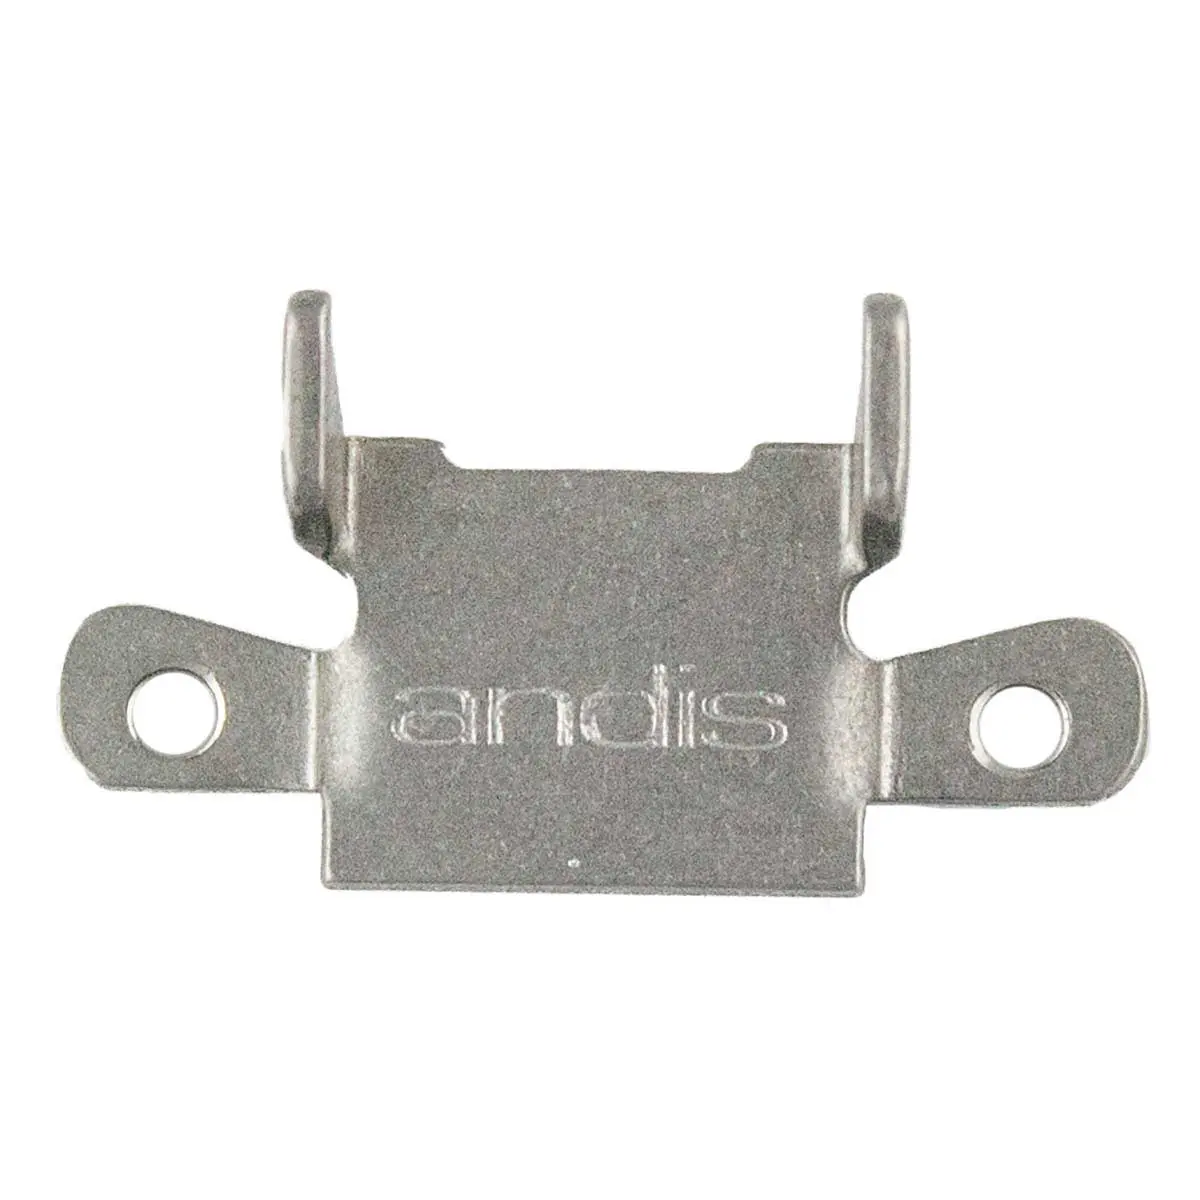 A metal bracket with two holes for the camera.